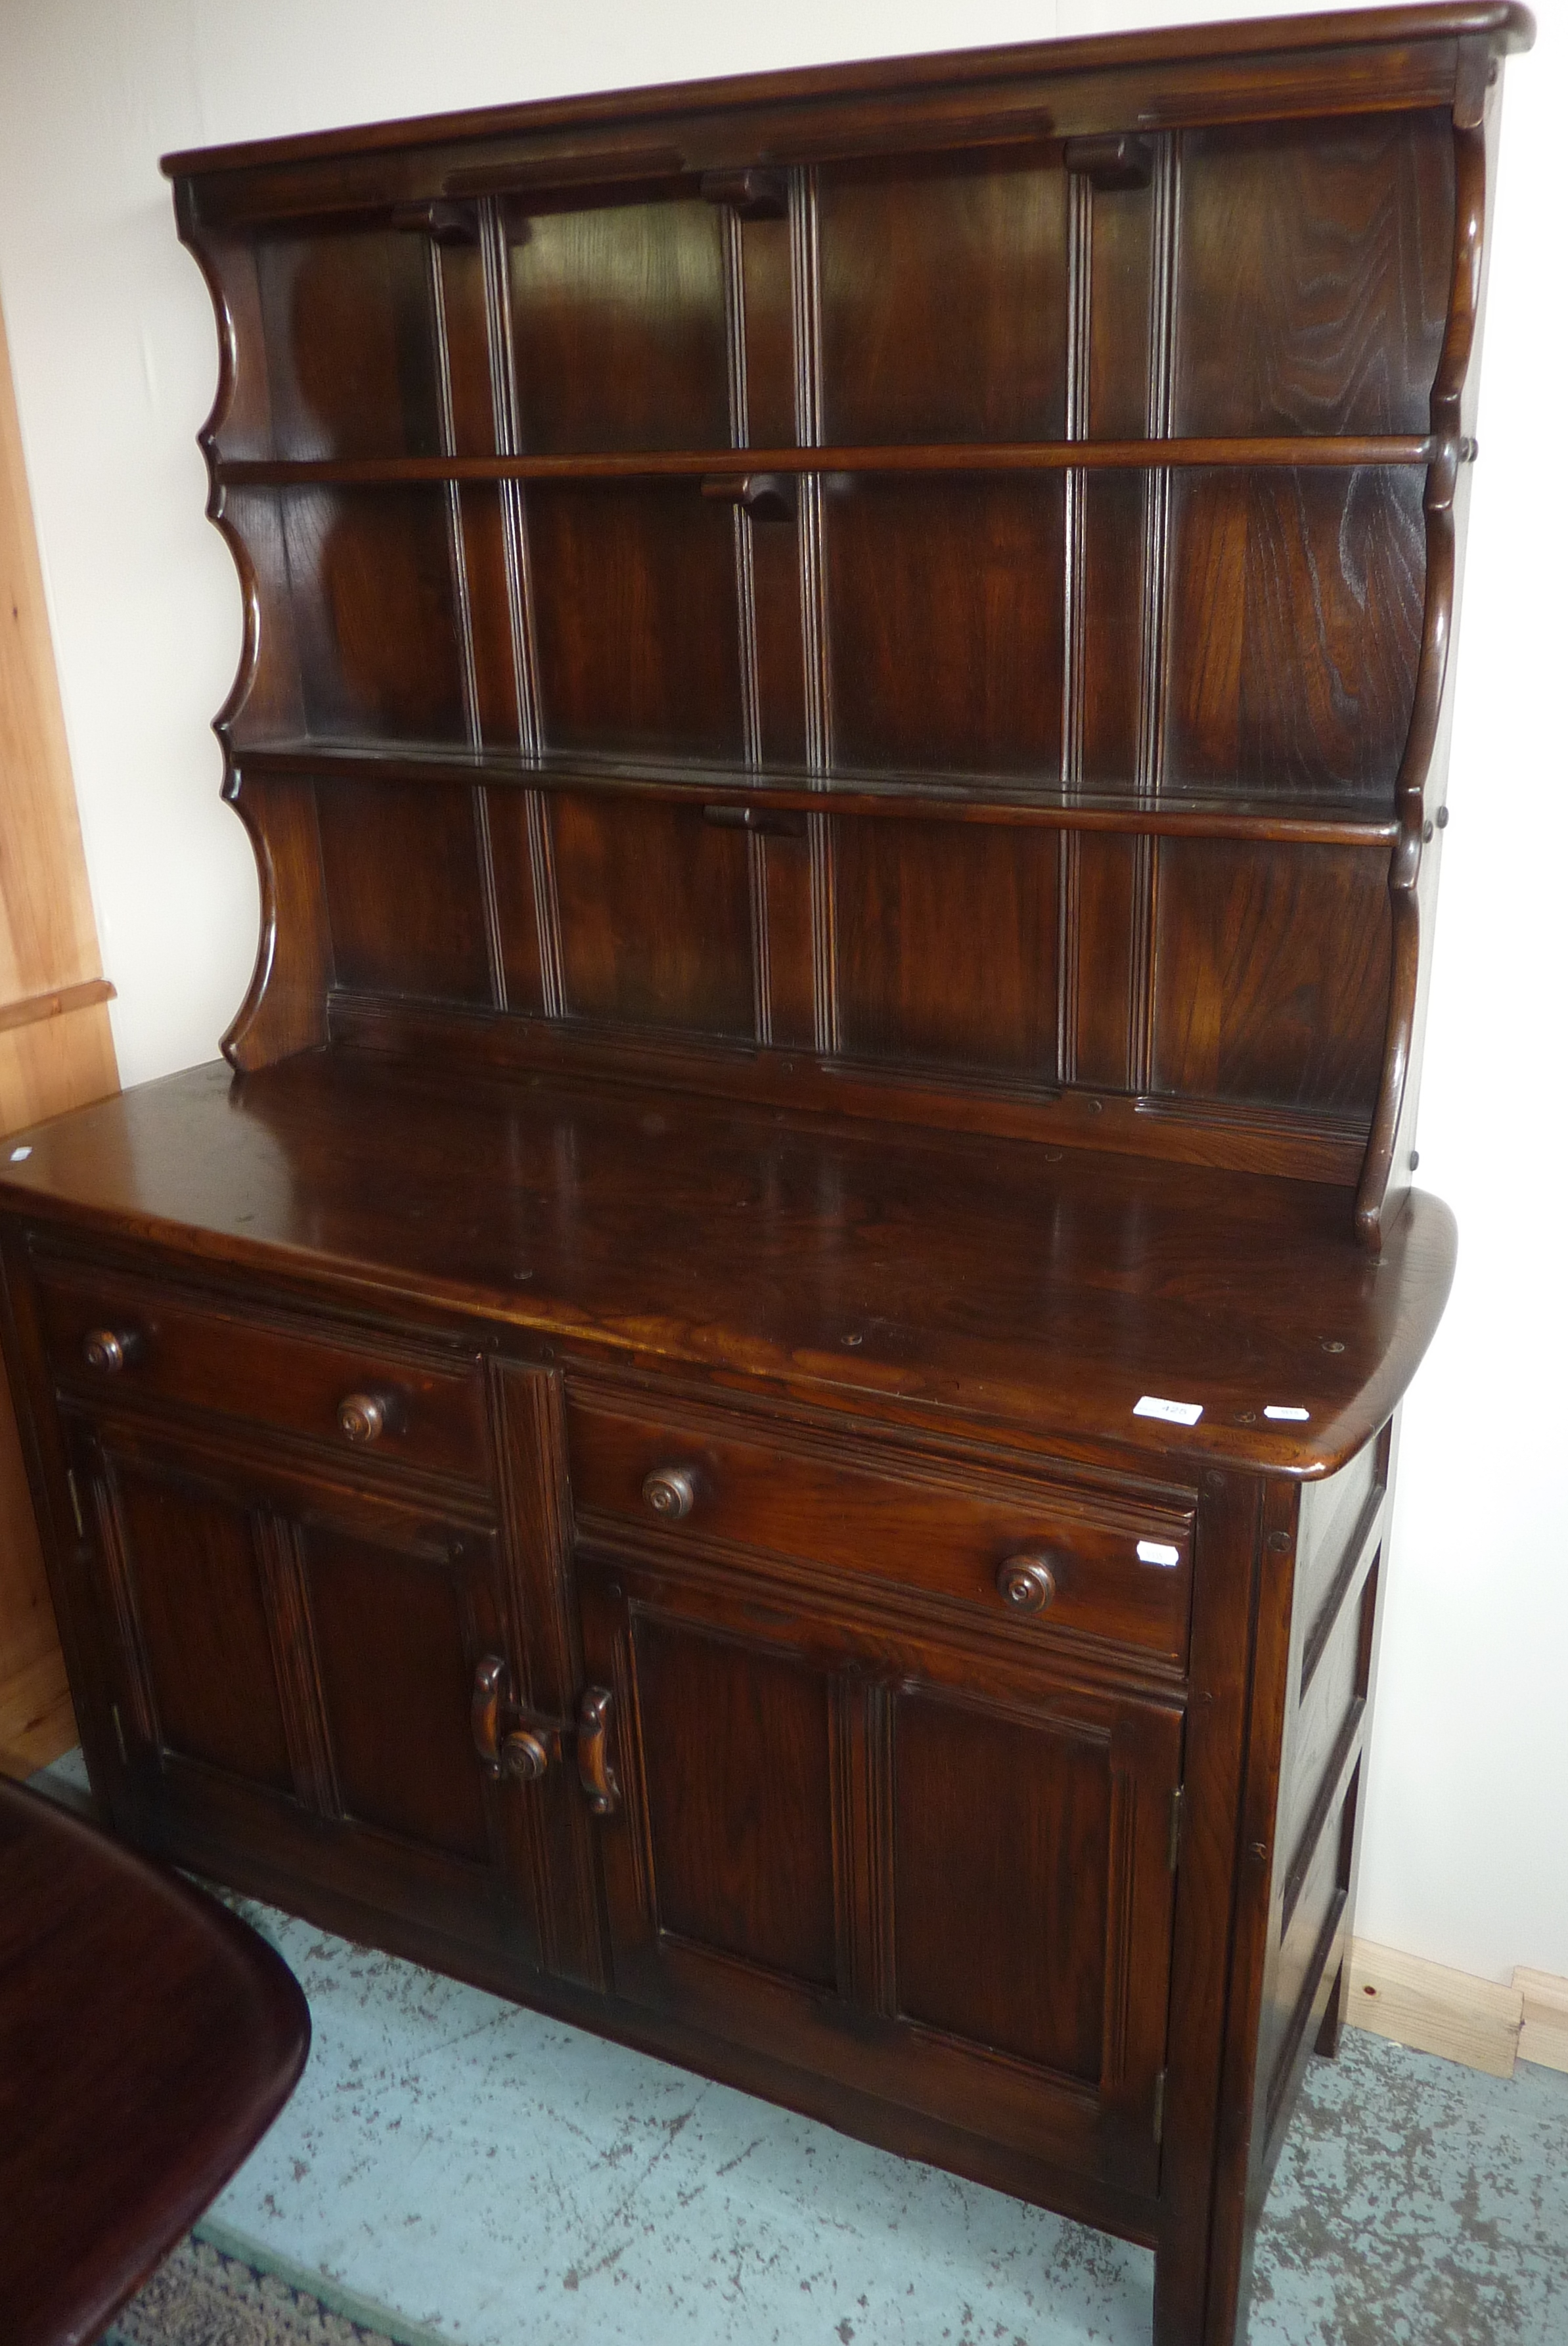 Ercol darkwood dresser with 2 tier raised back above 2 drawers and 2 cupboard doors